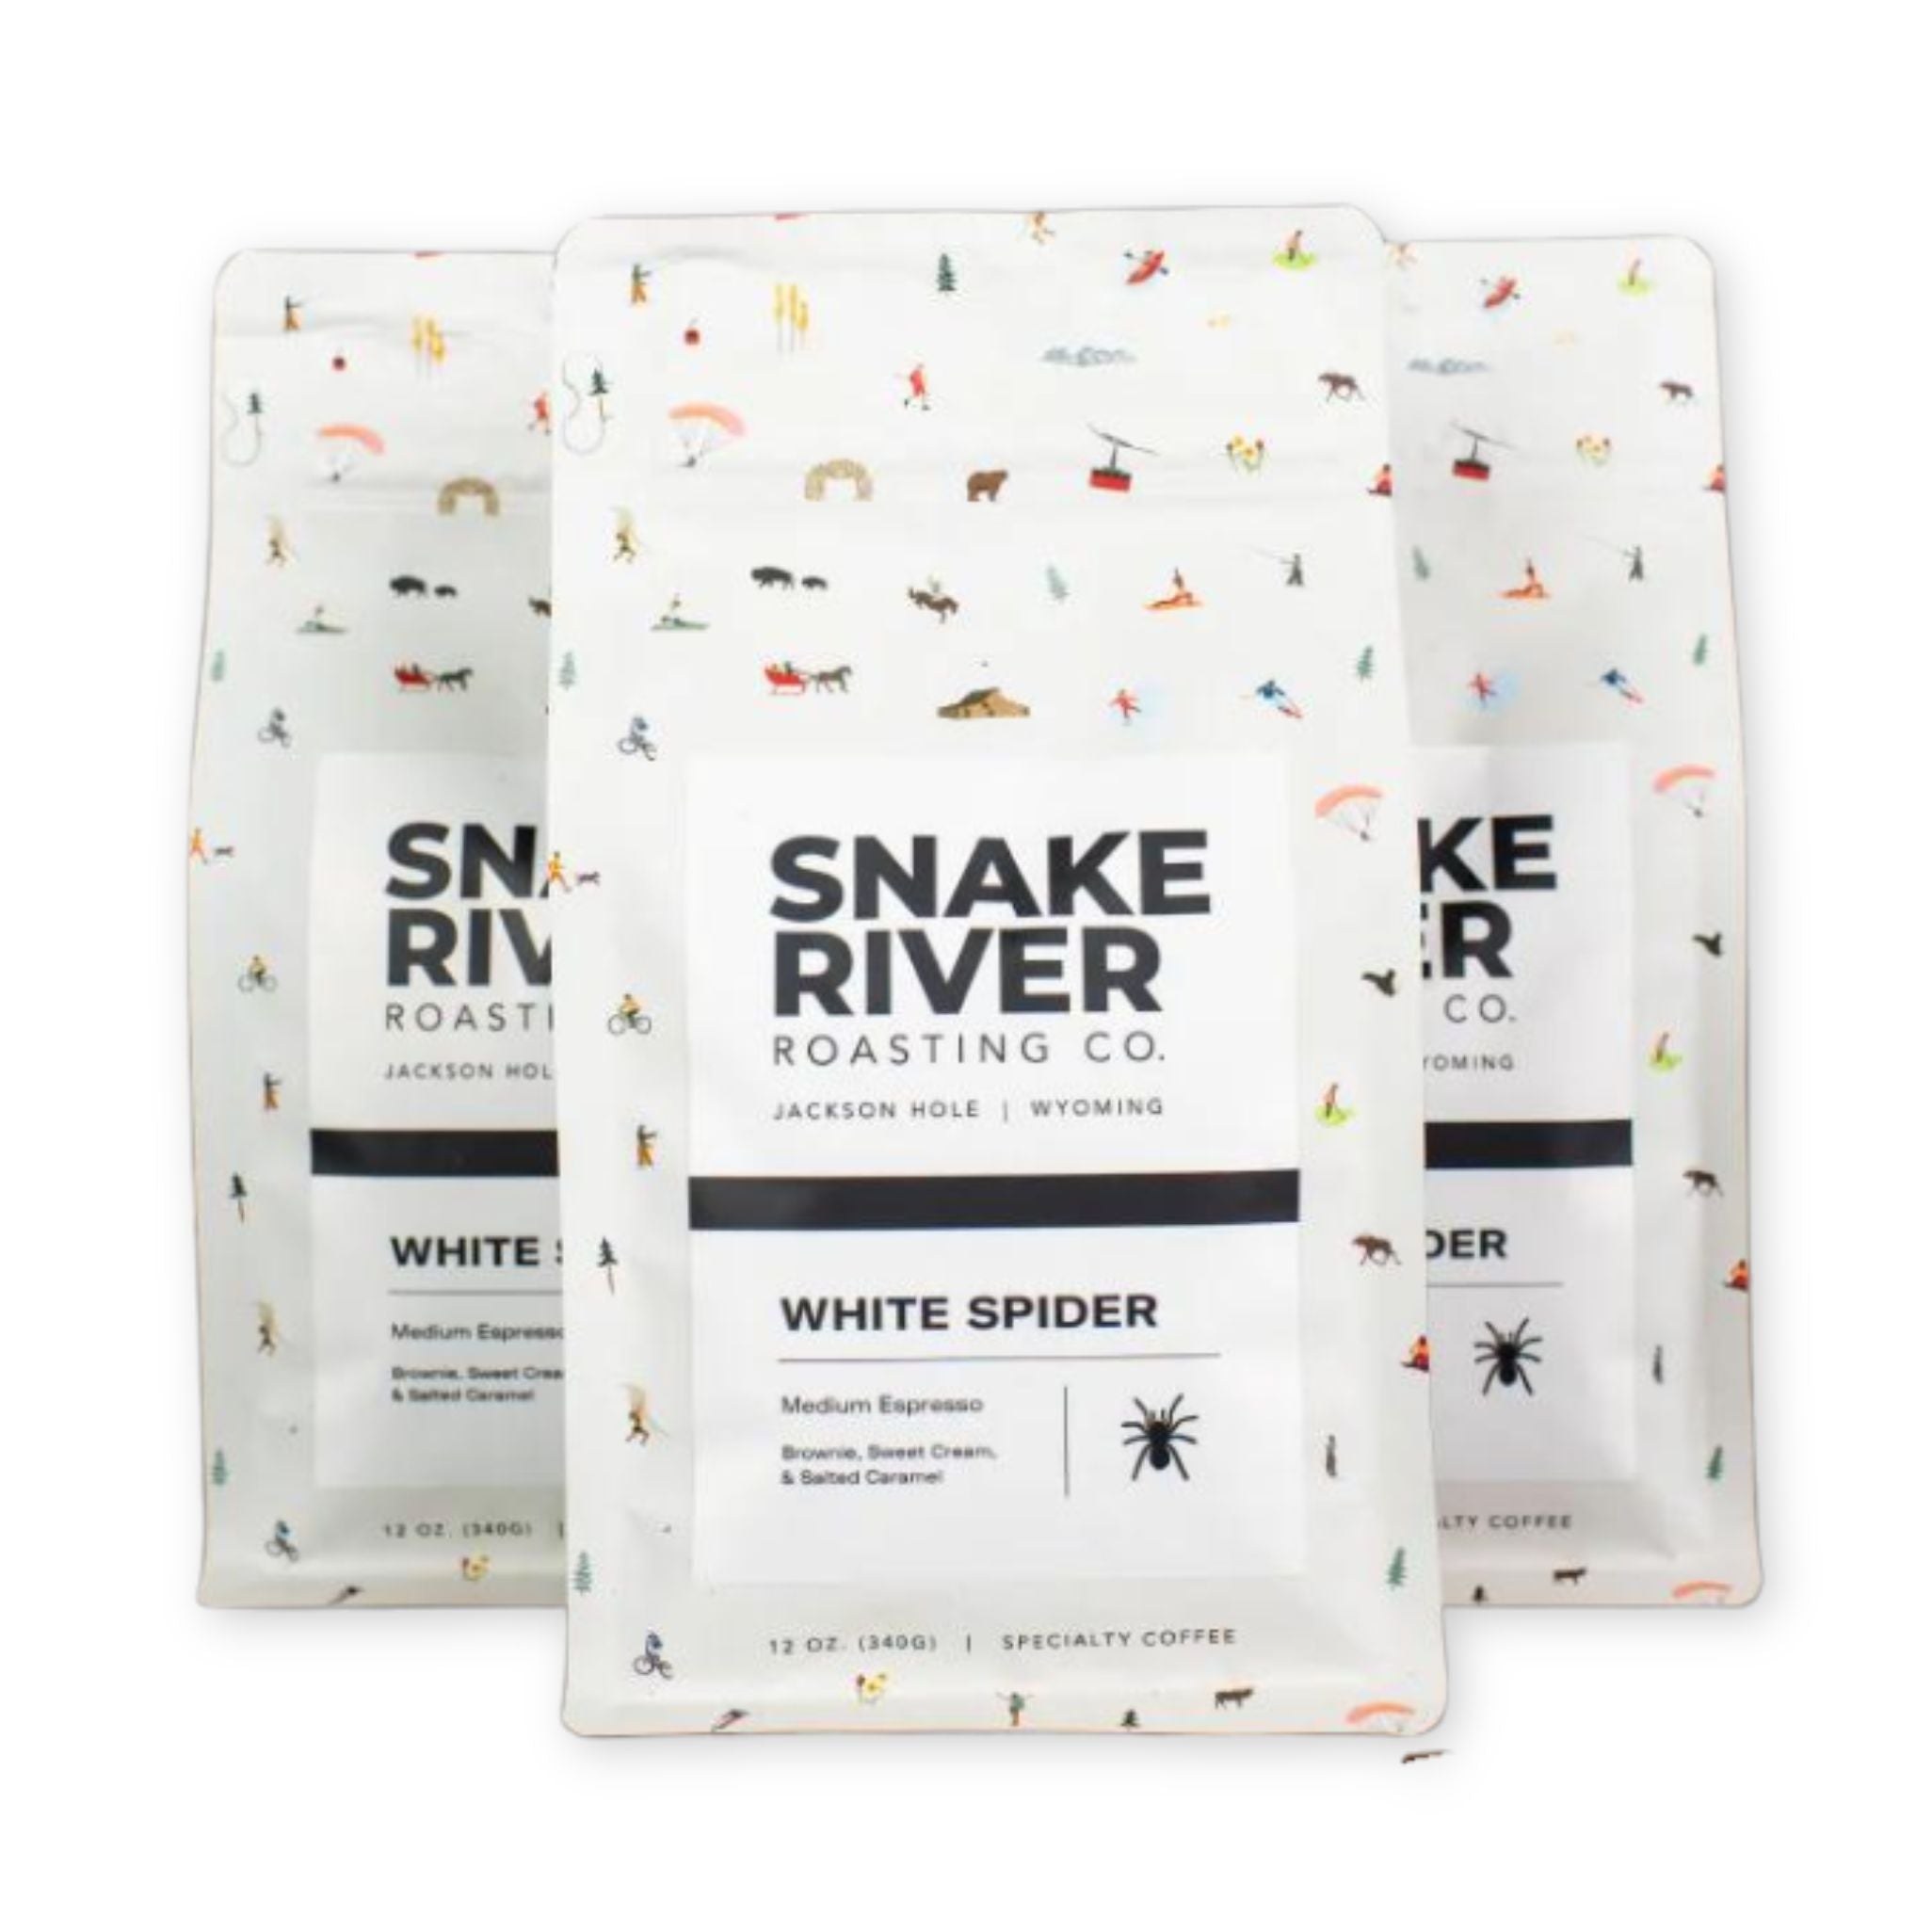 Collection of Snake River Roasting Bags